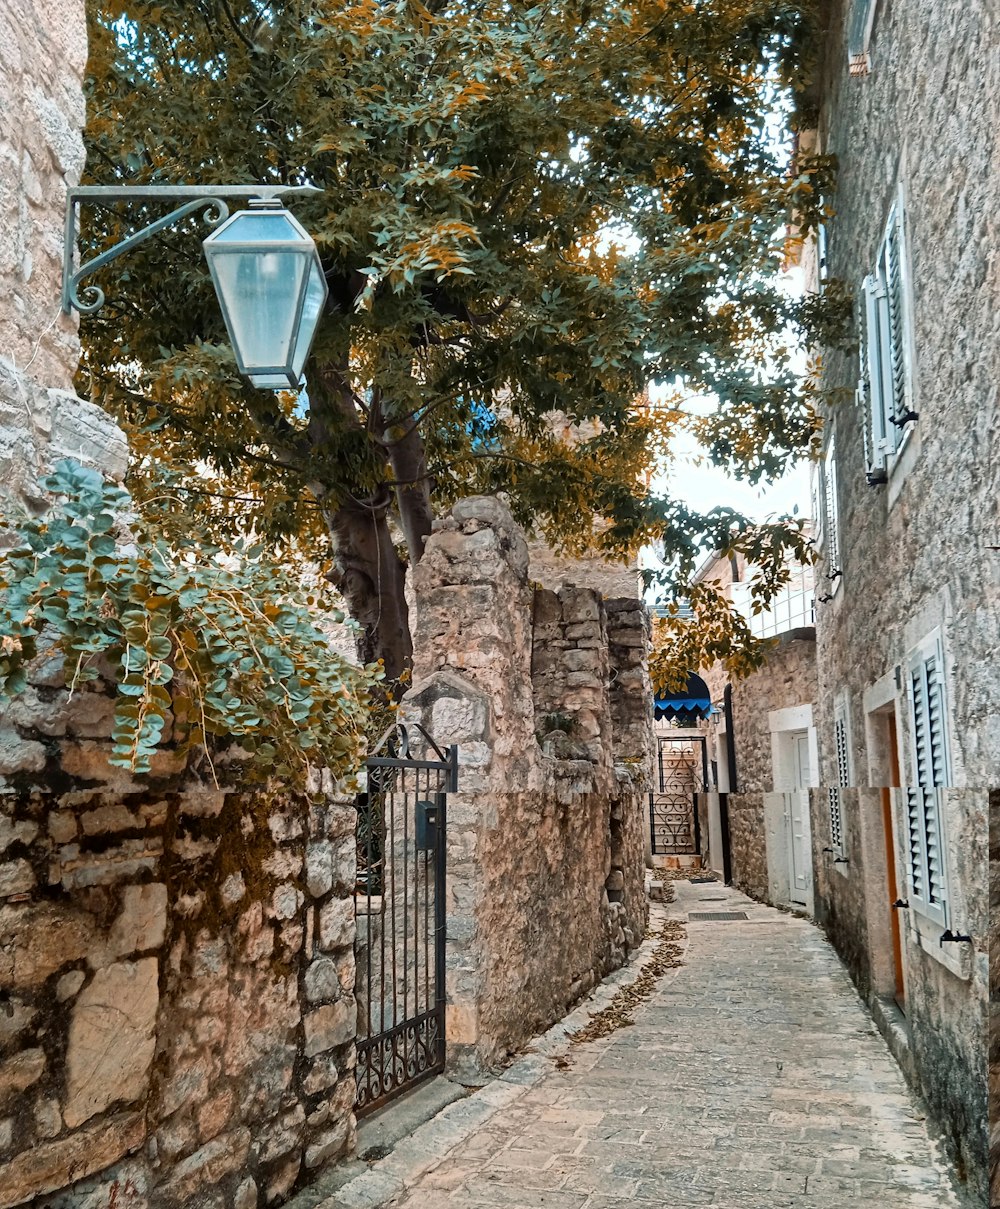 a street light hanging over a stone wall next to a tree